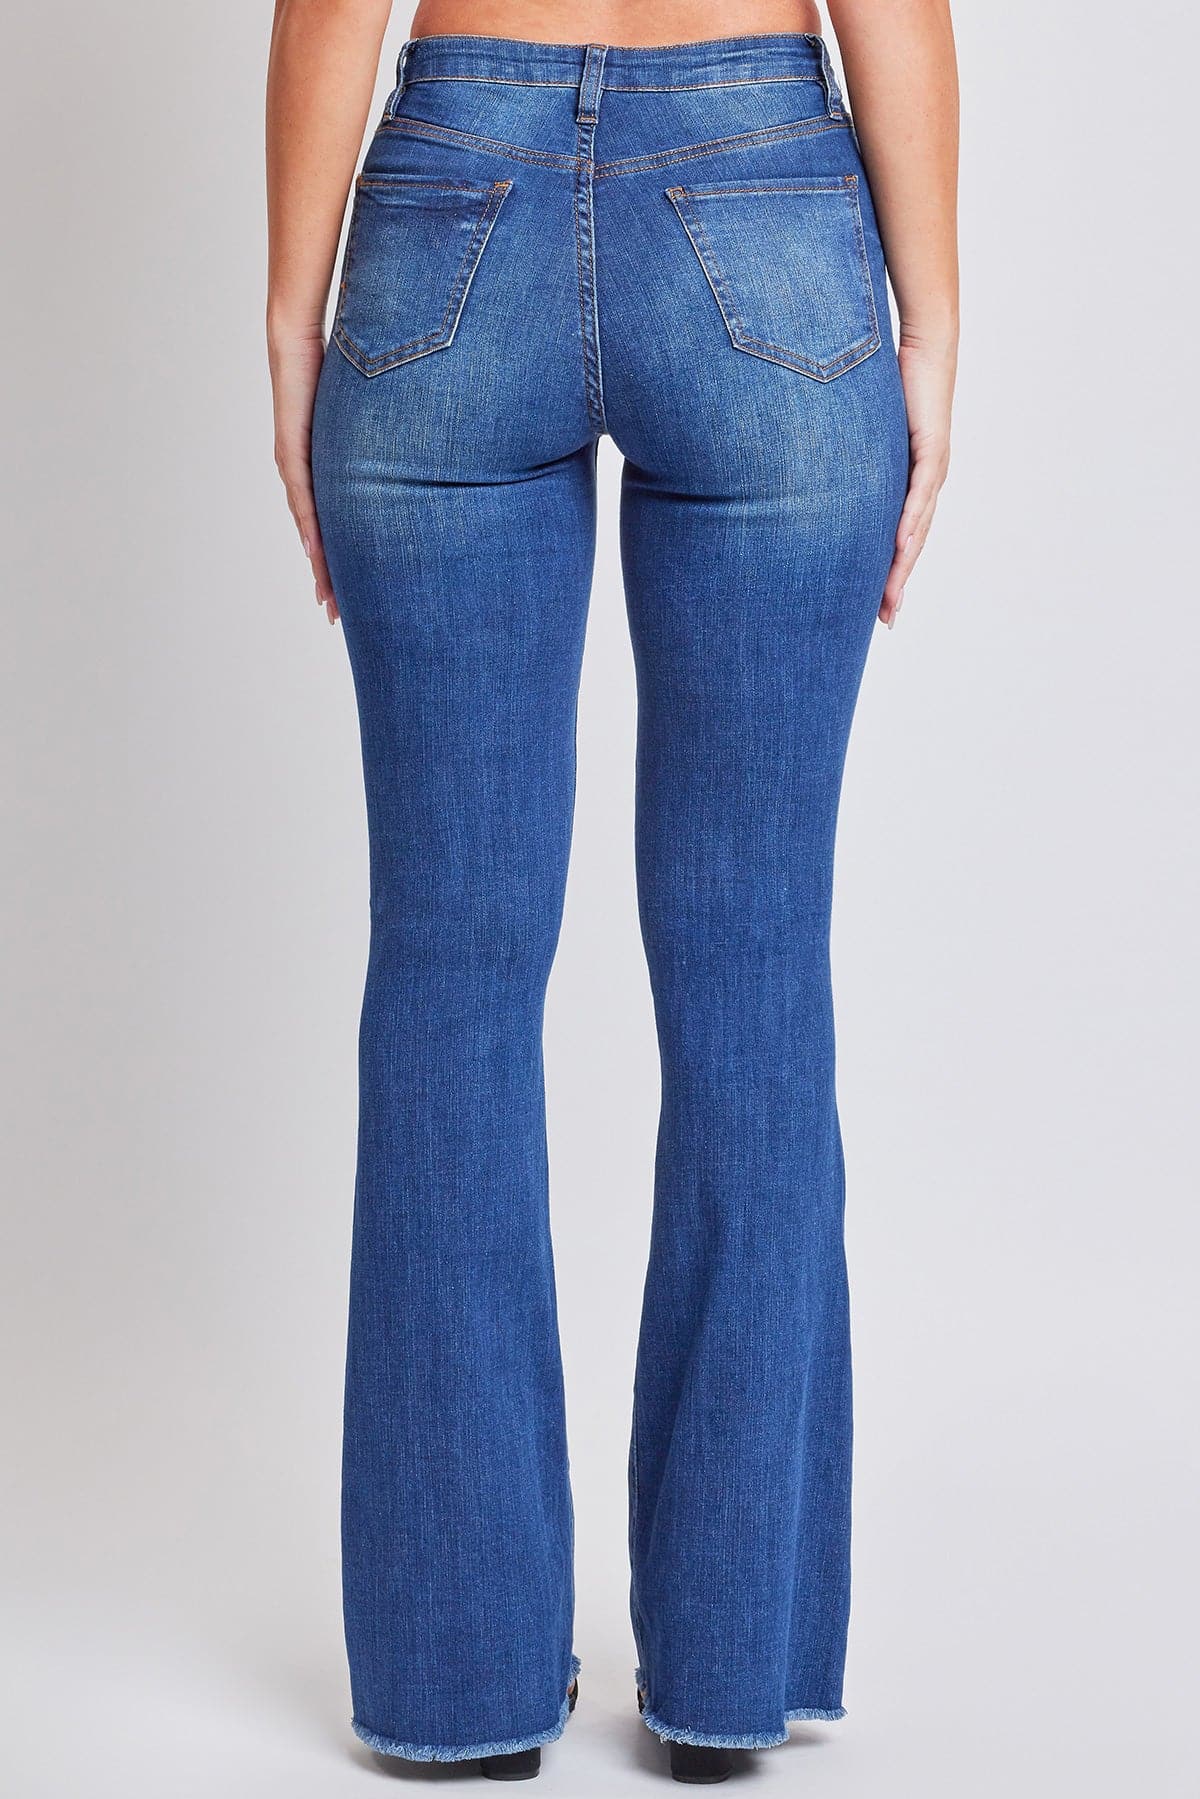 Women's High Rise Flare Jeans With Frayed Hem